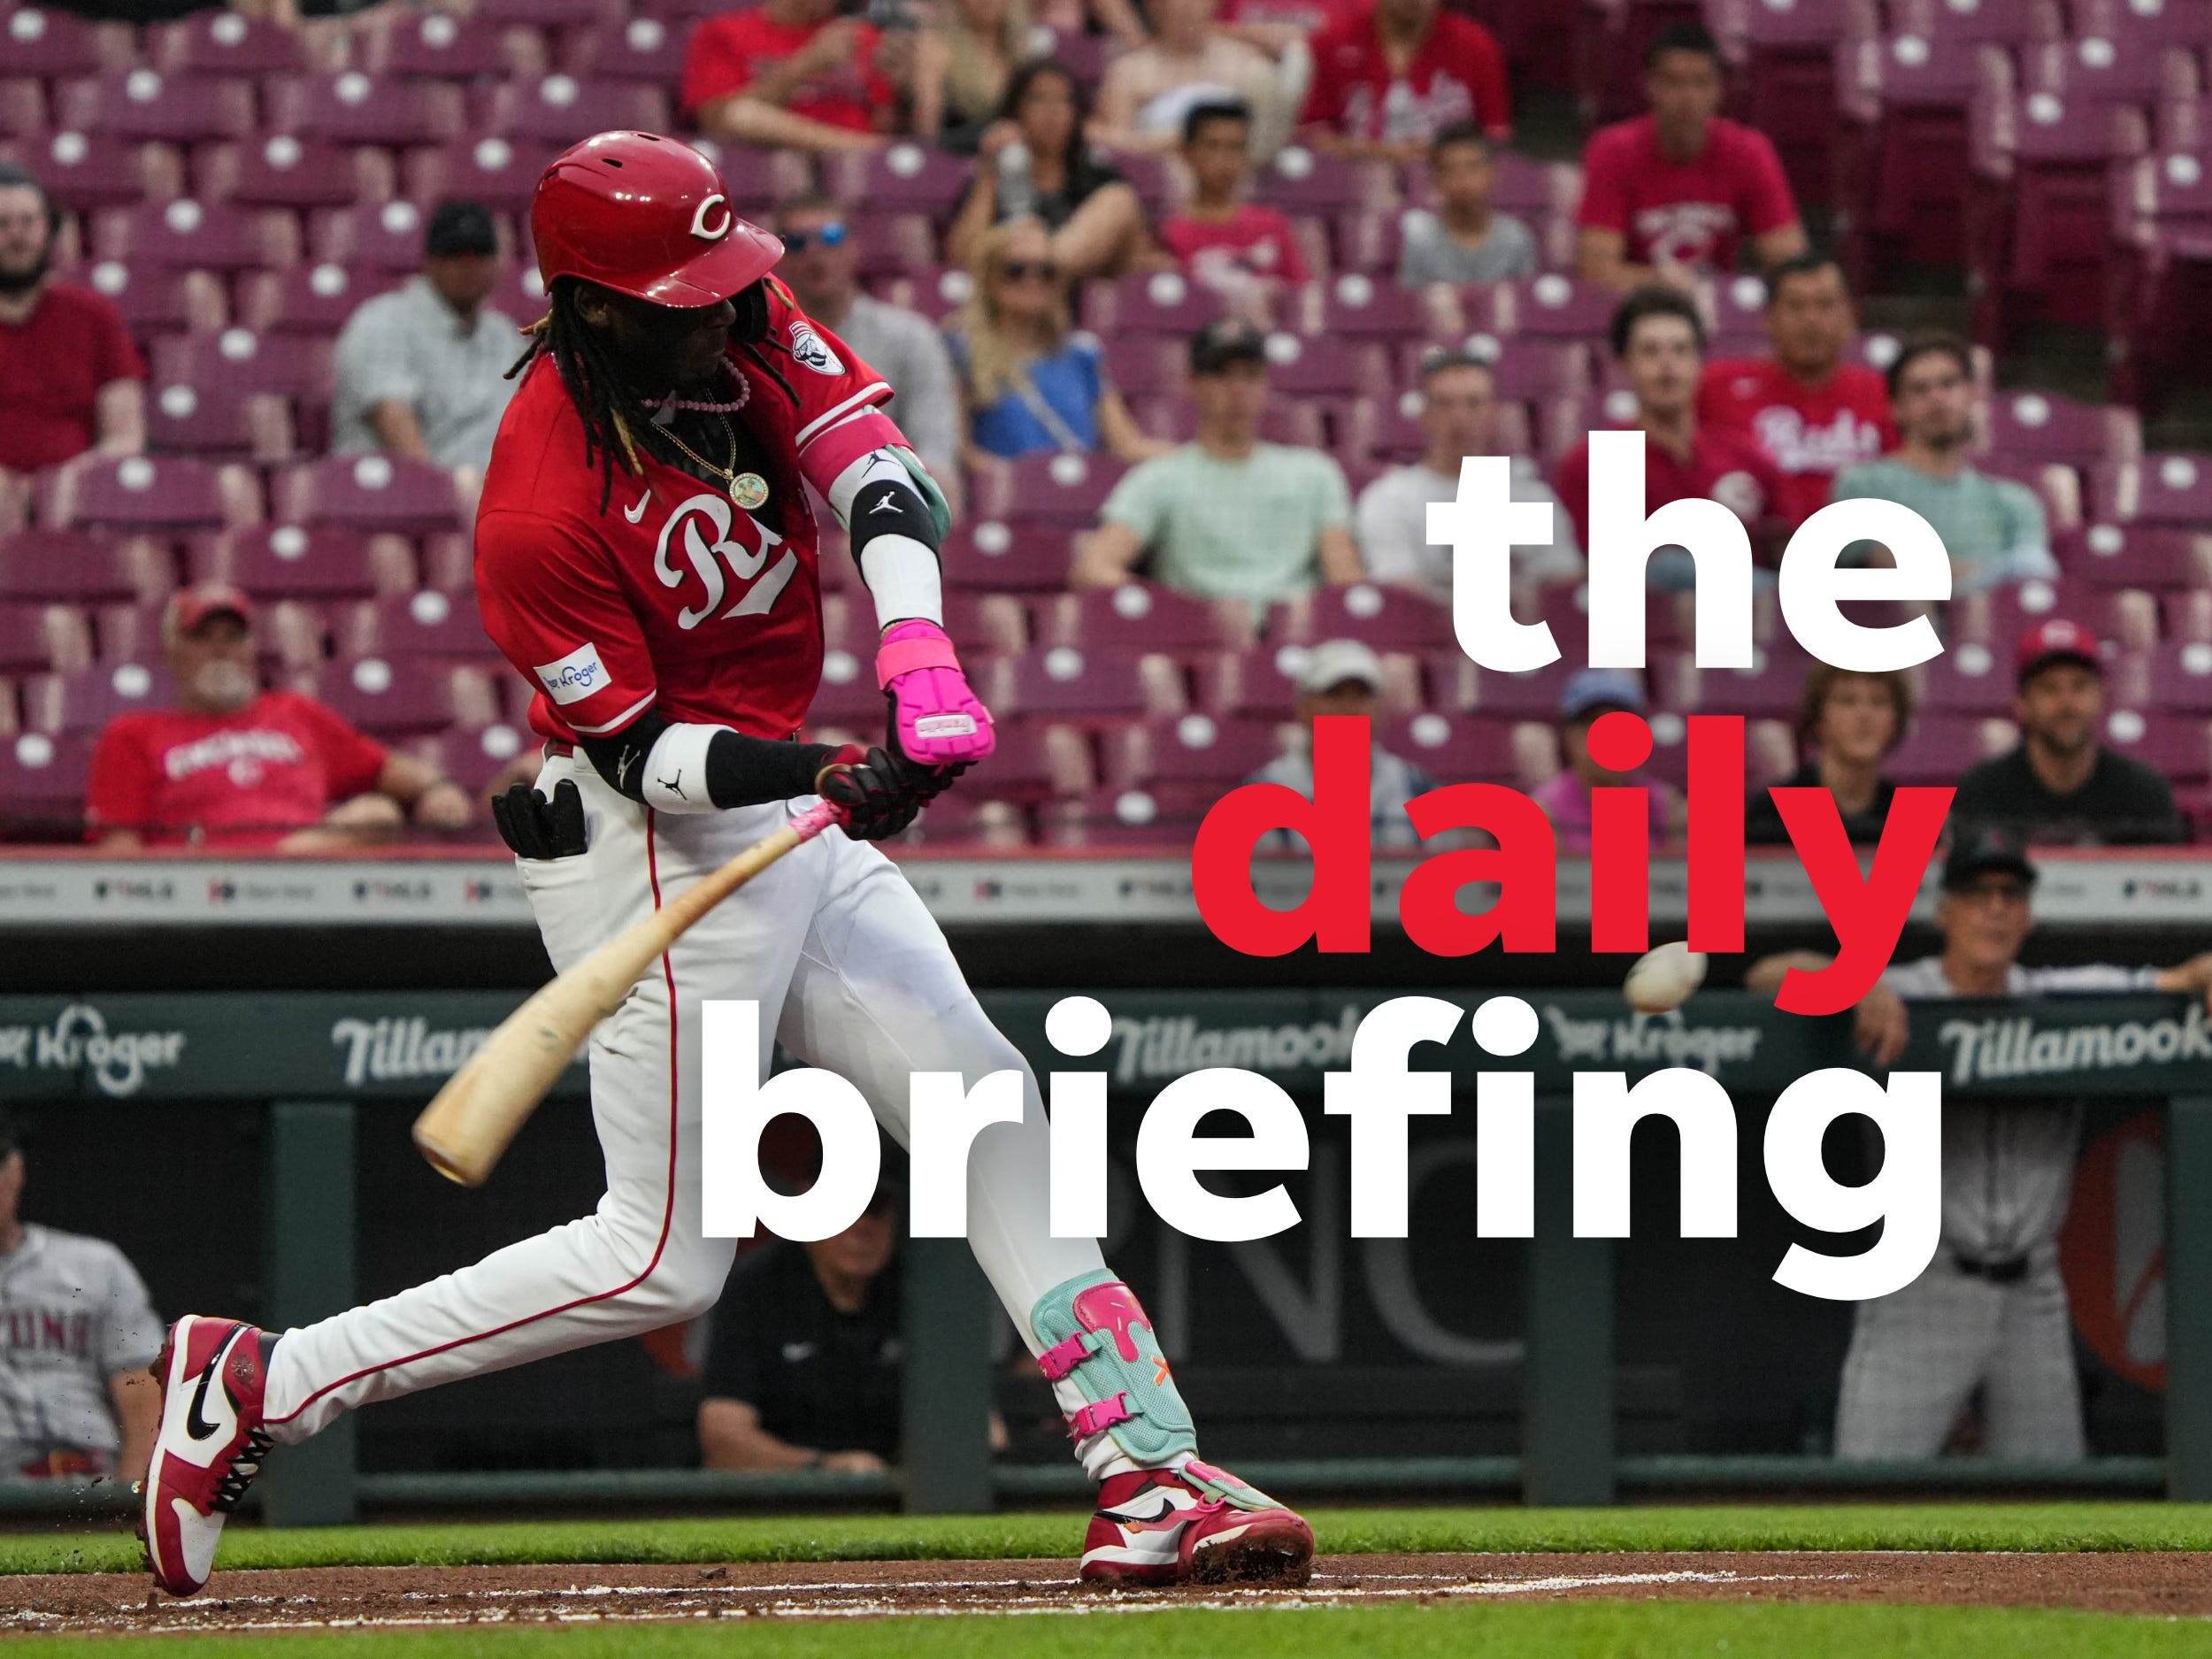 One year ago, a new Reds team was born: Here are today's top stories | Daily Briefing